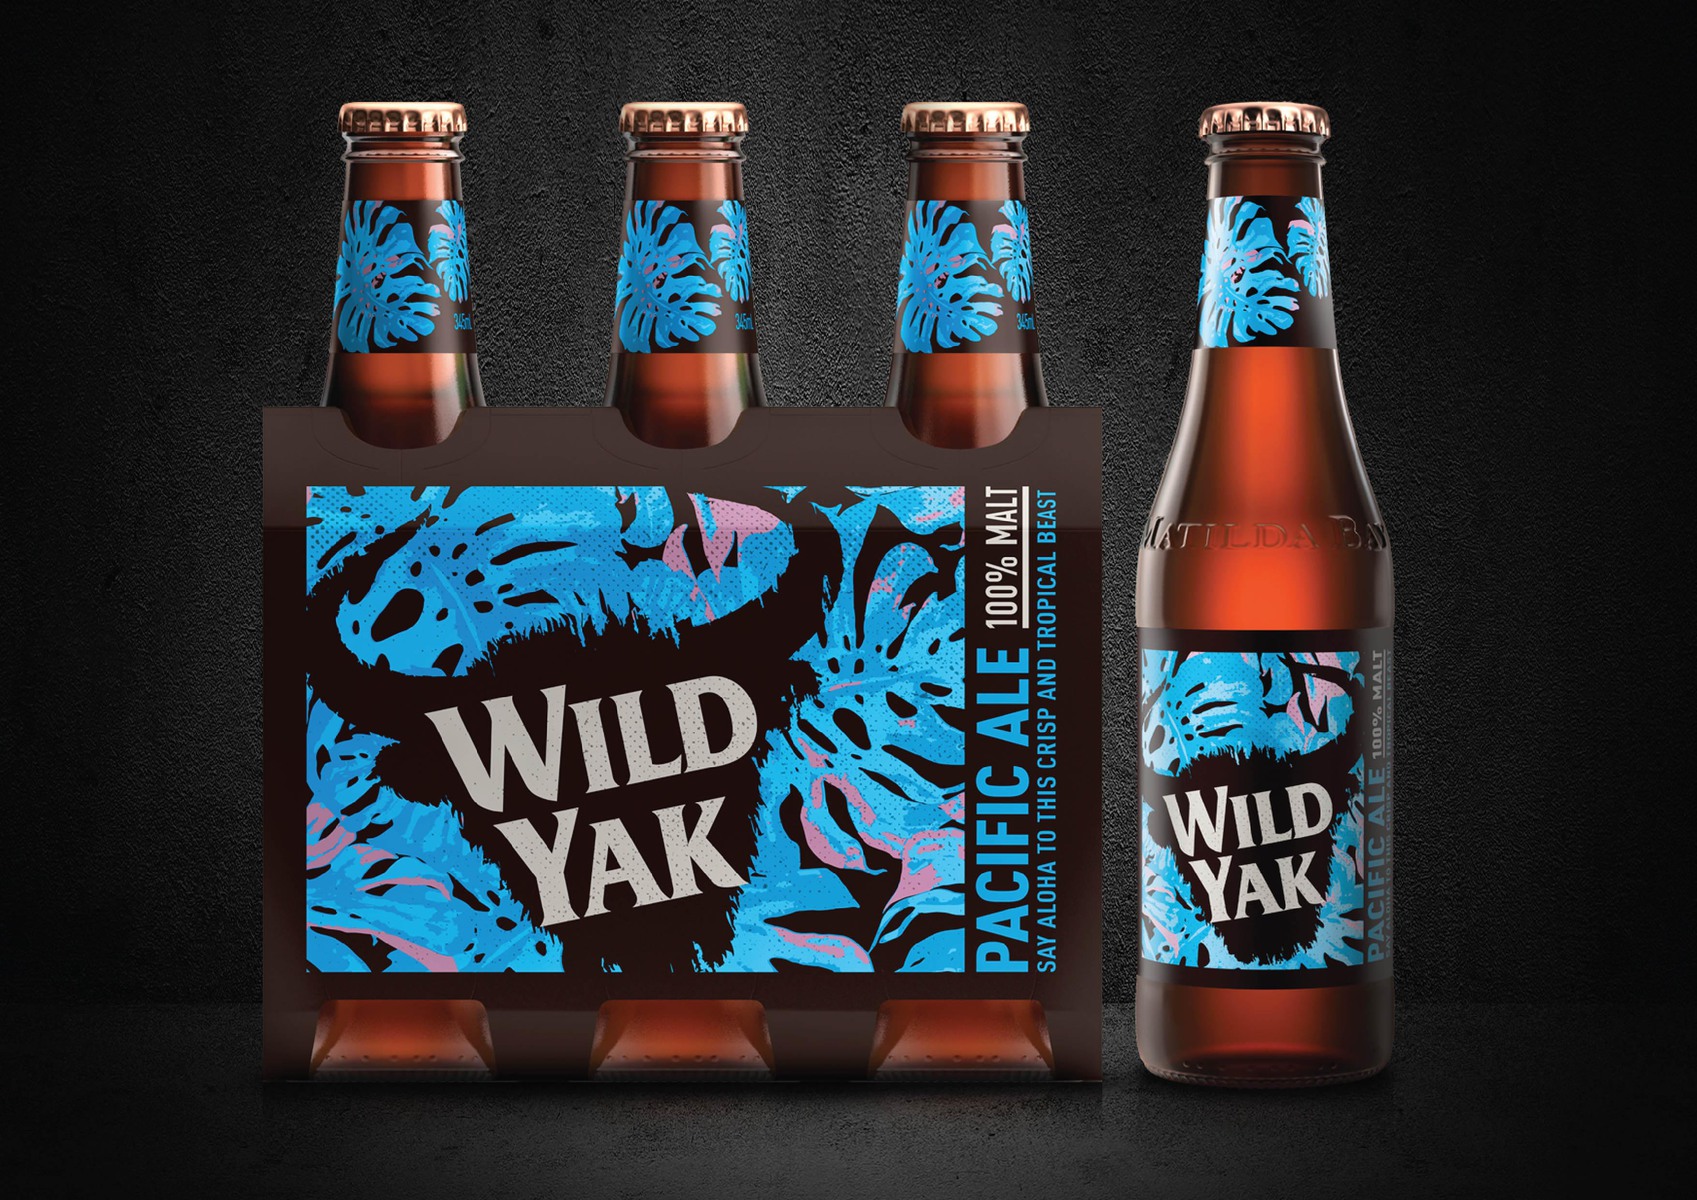 Yak Ales A Different Breed of Craft Beer